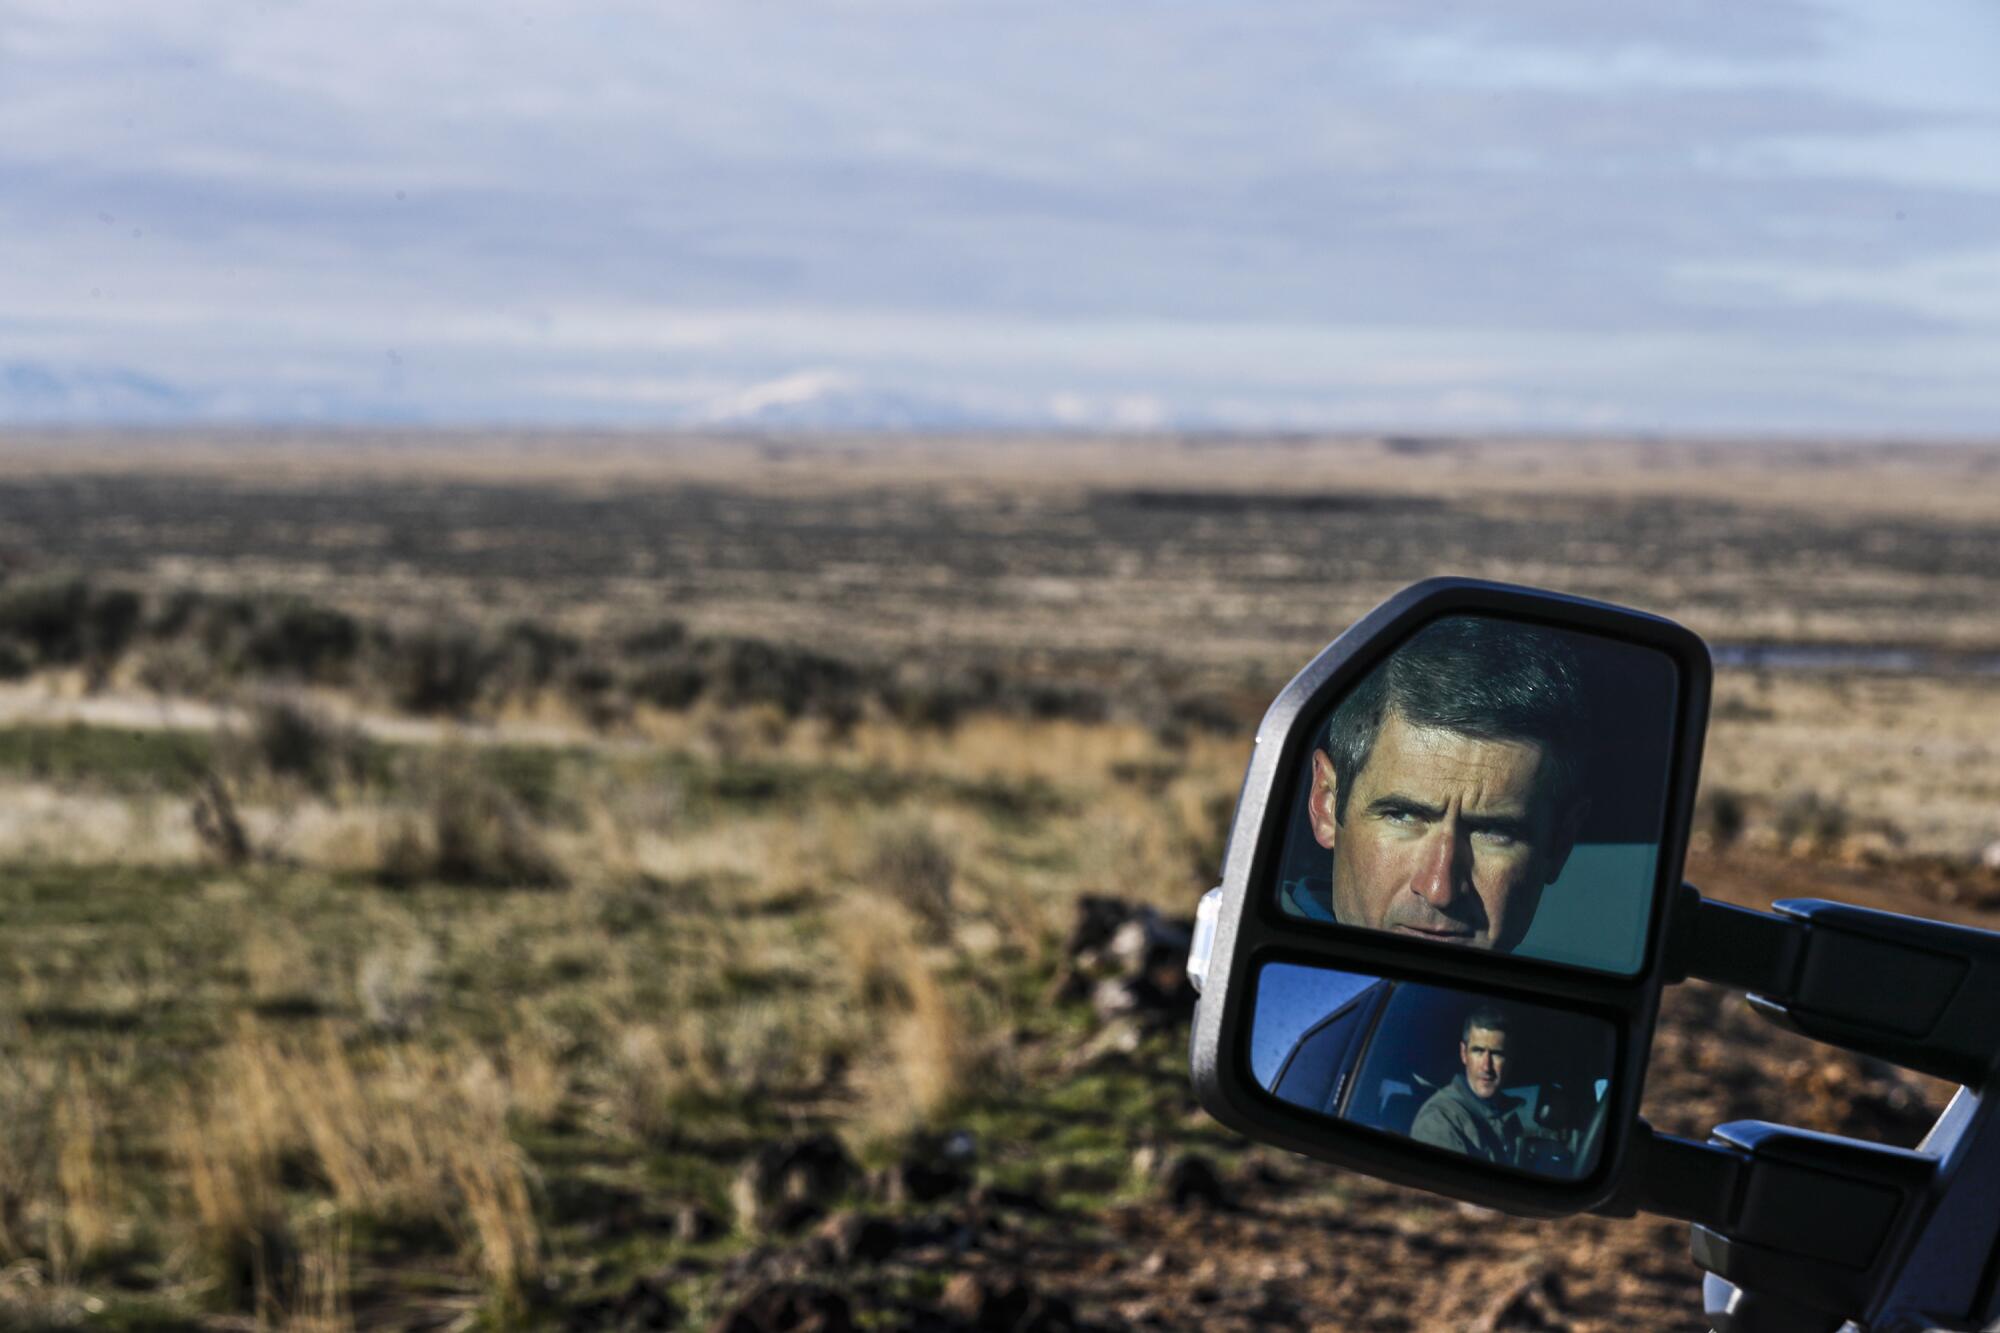 A man's face is reflected in a side-view mirror as he drives across a proposed wind farm site.